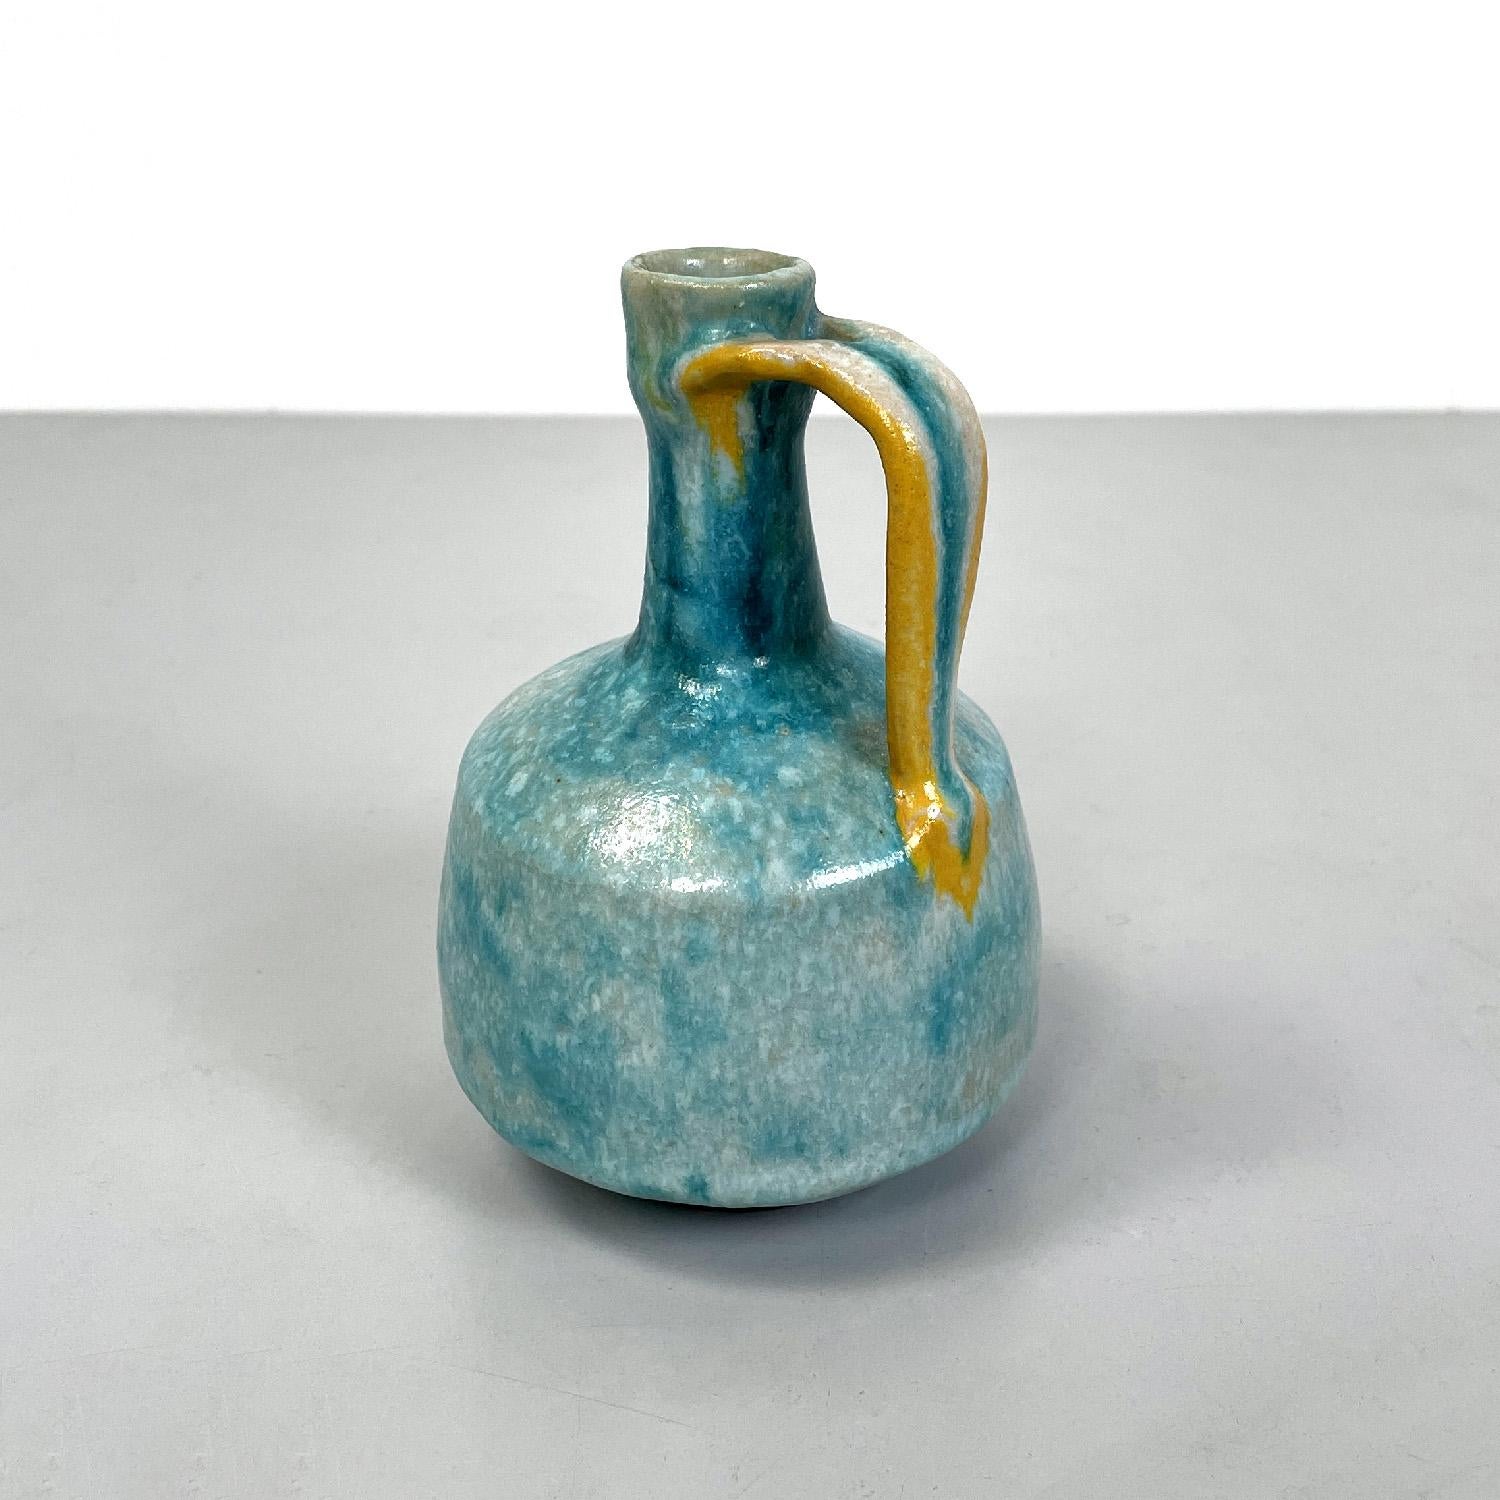 Italian modern light blue and yellow ceramic vase by Bruno Gambone, 1970s
Glazed ceramic vase with round base. The structure has an elongated neck in the upper part, then expands in the lower part, on one side there is a handle that connects the two